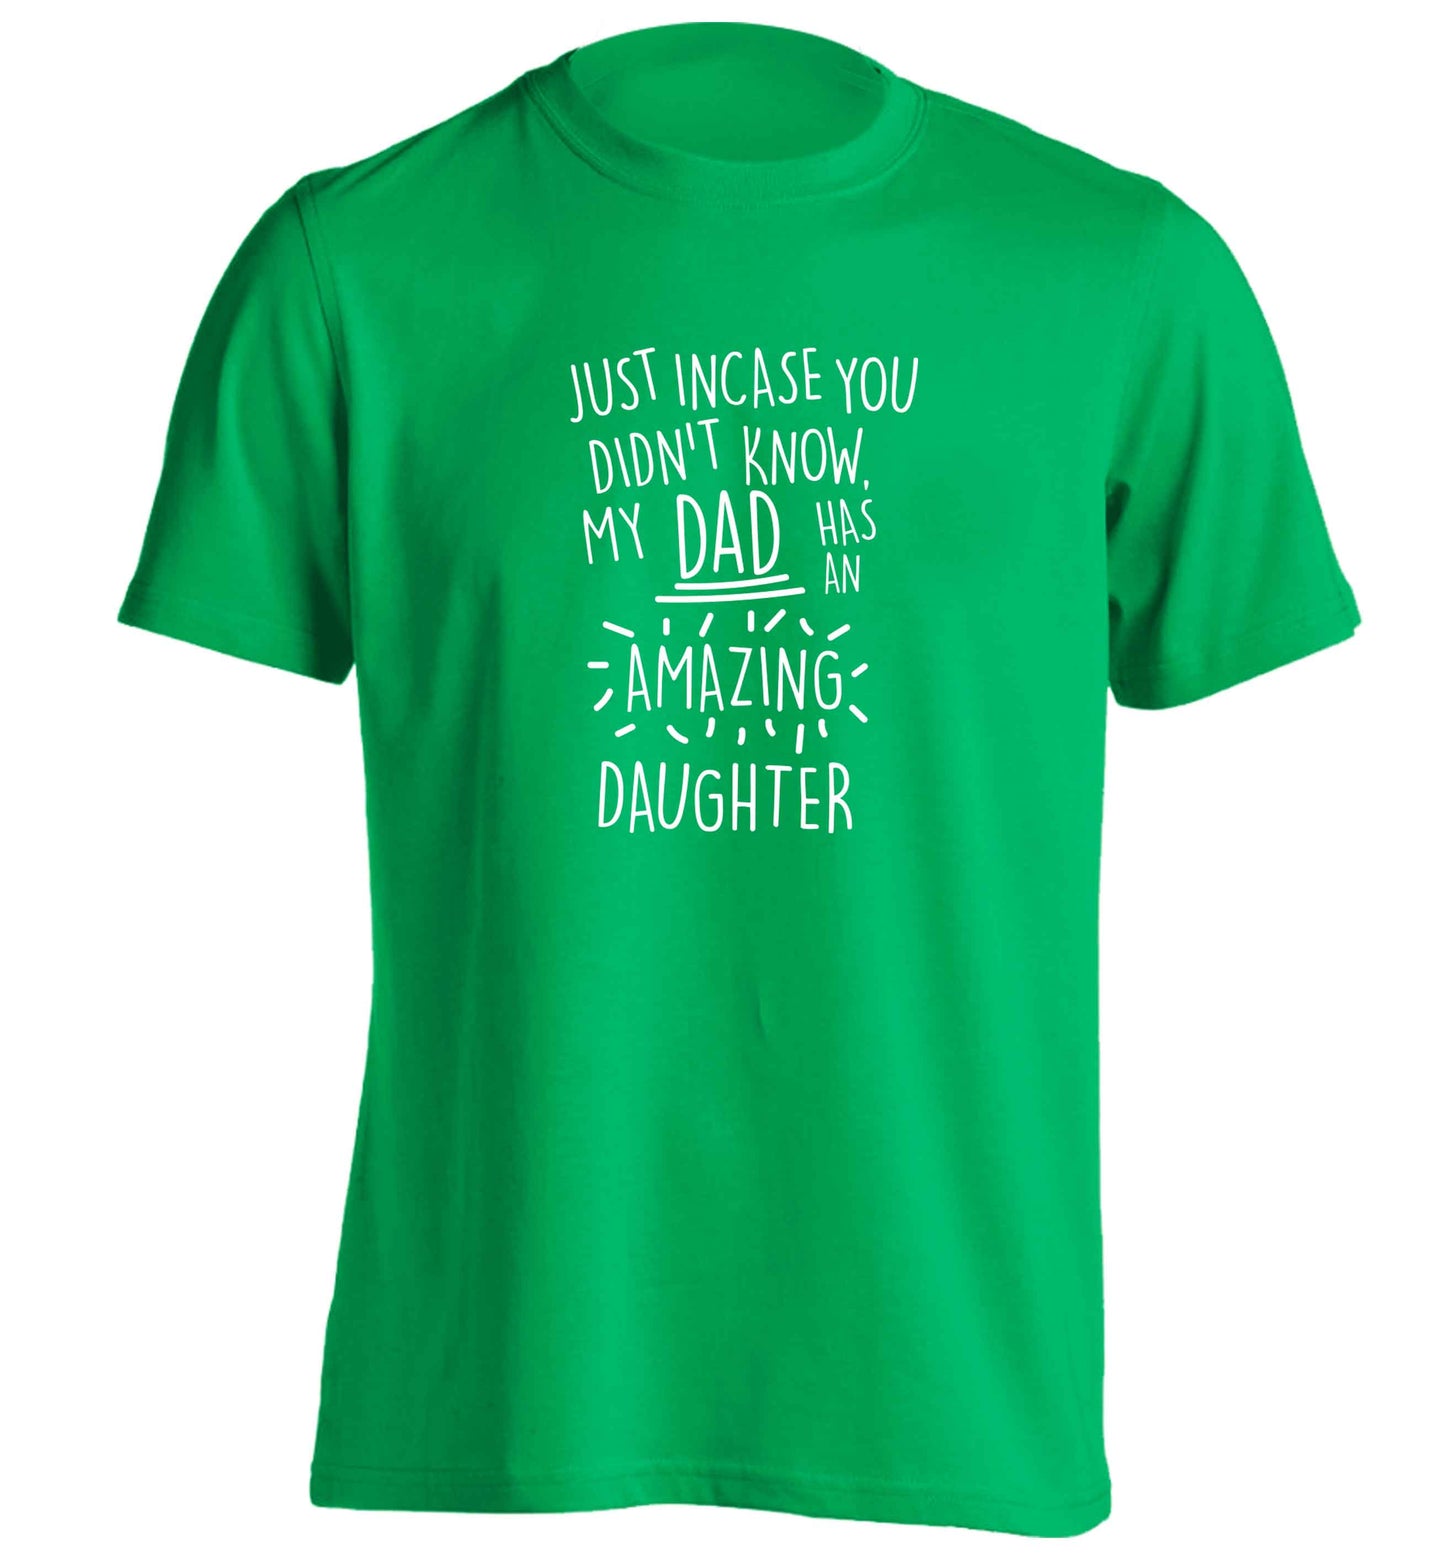 Just incase you didn't know my dad has an amazing daughter adults unisex green Tshirt 2XL